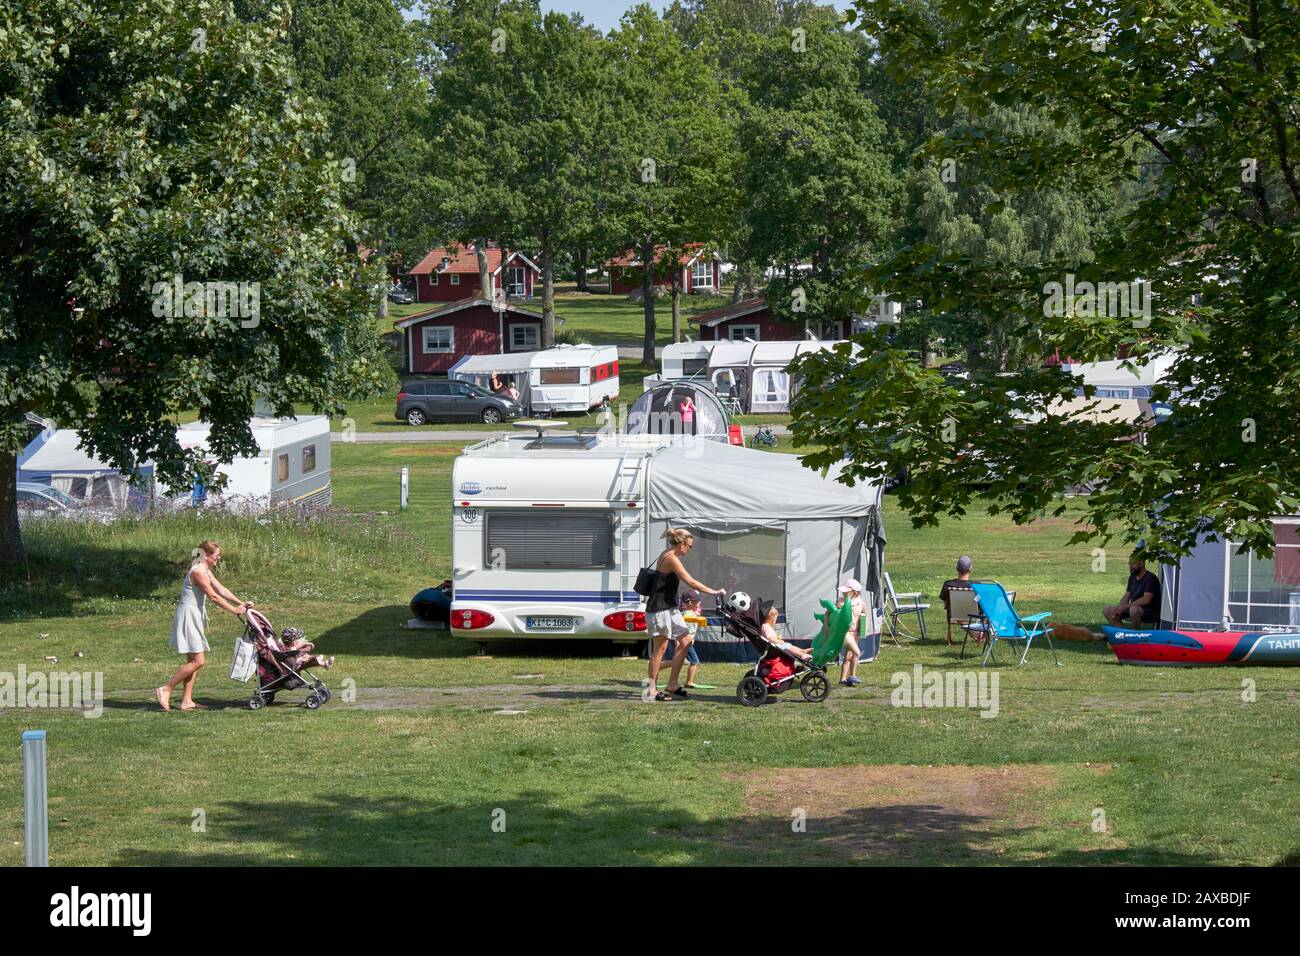 Campsite scene with caravans and wooden holiday chalets Stock Photo